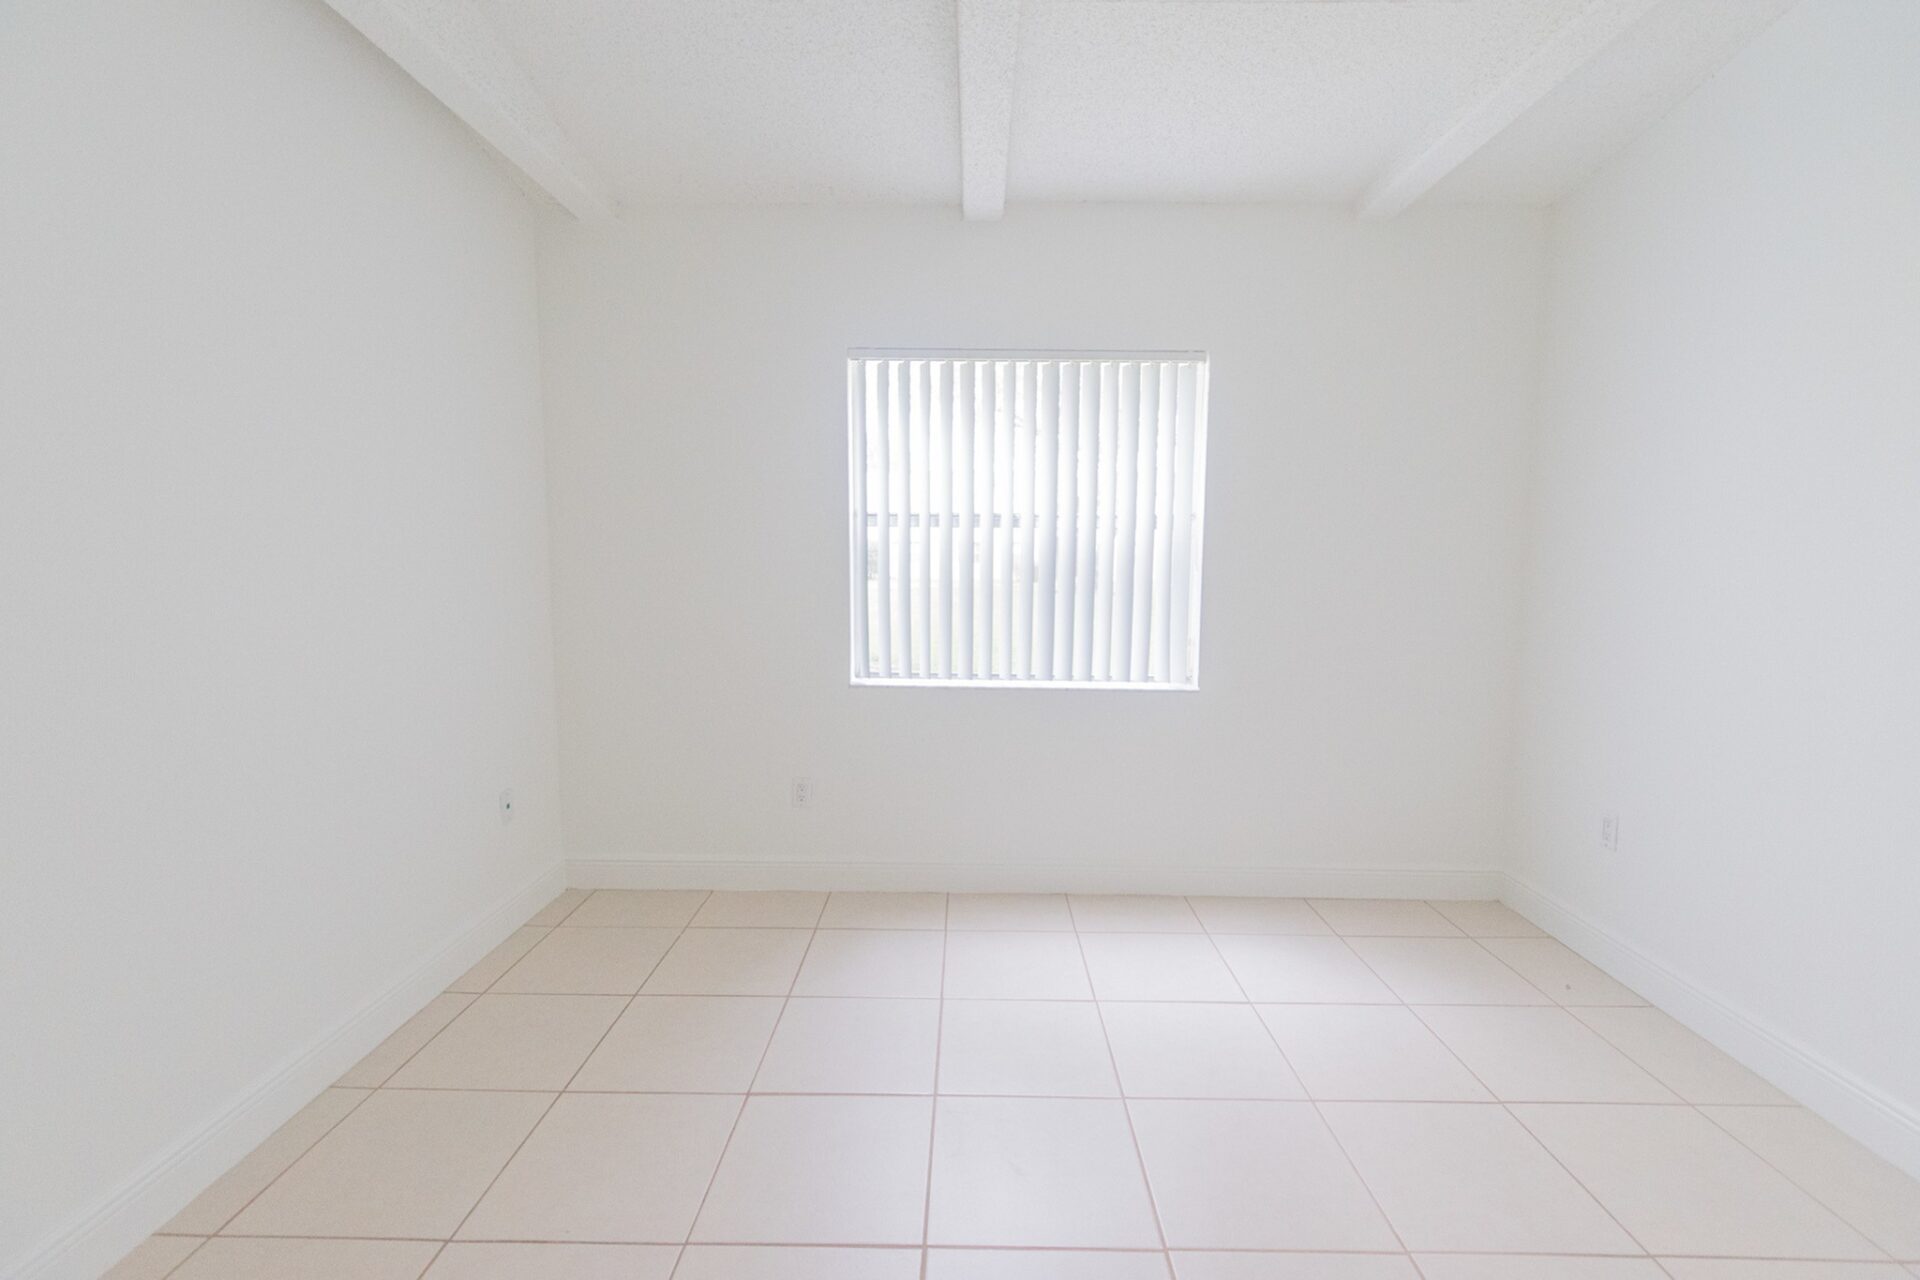 Room with white tile flooring and window.